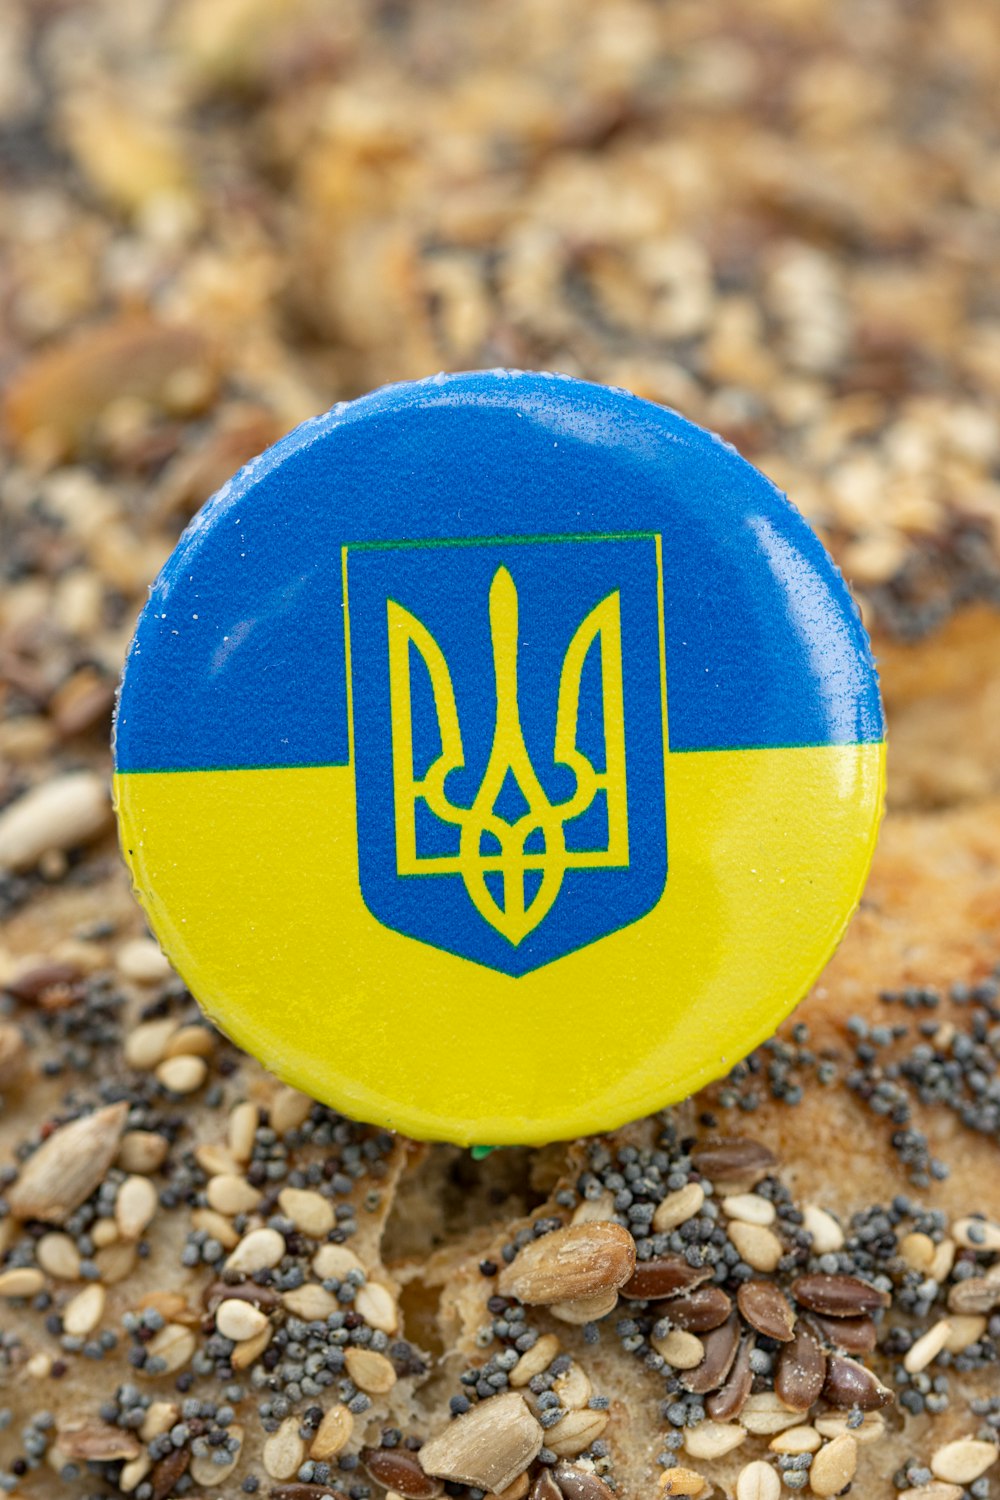 a blue and yellow button with a coat of arms on it